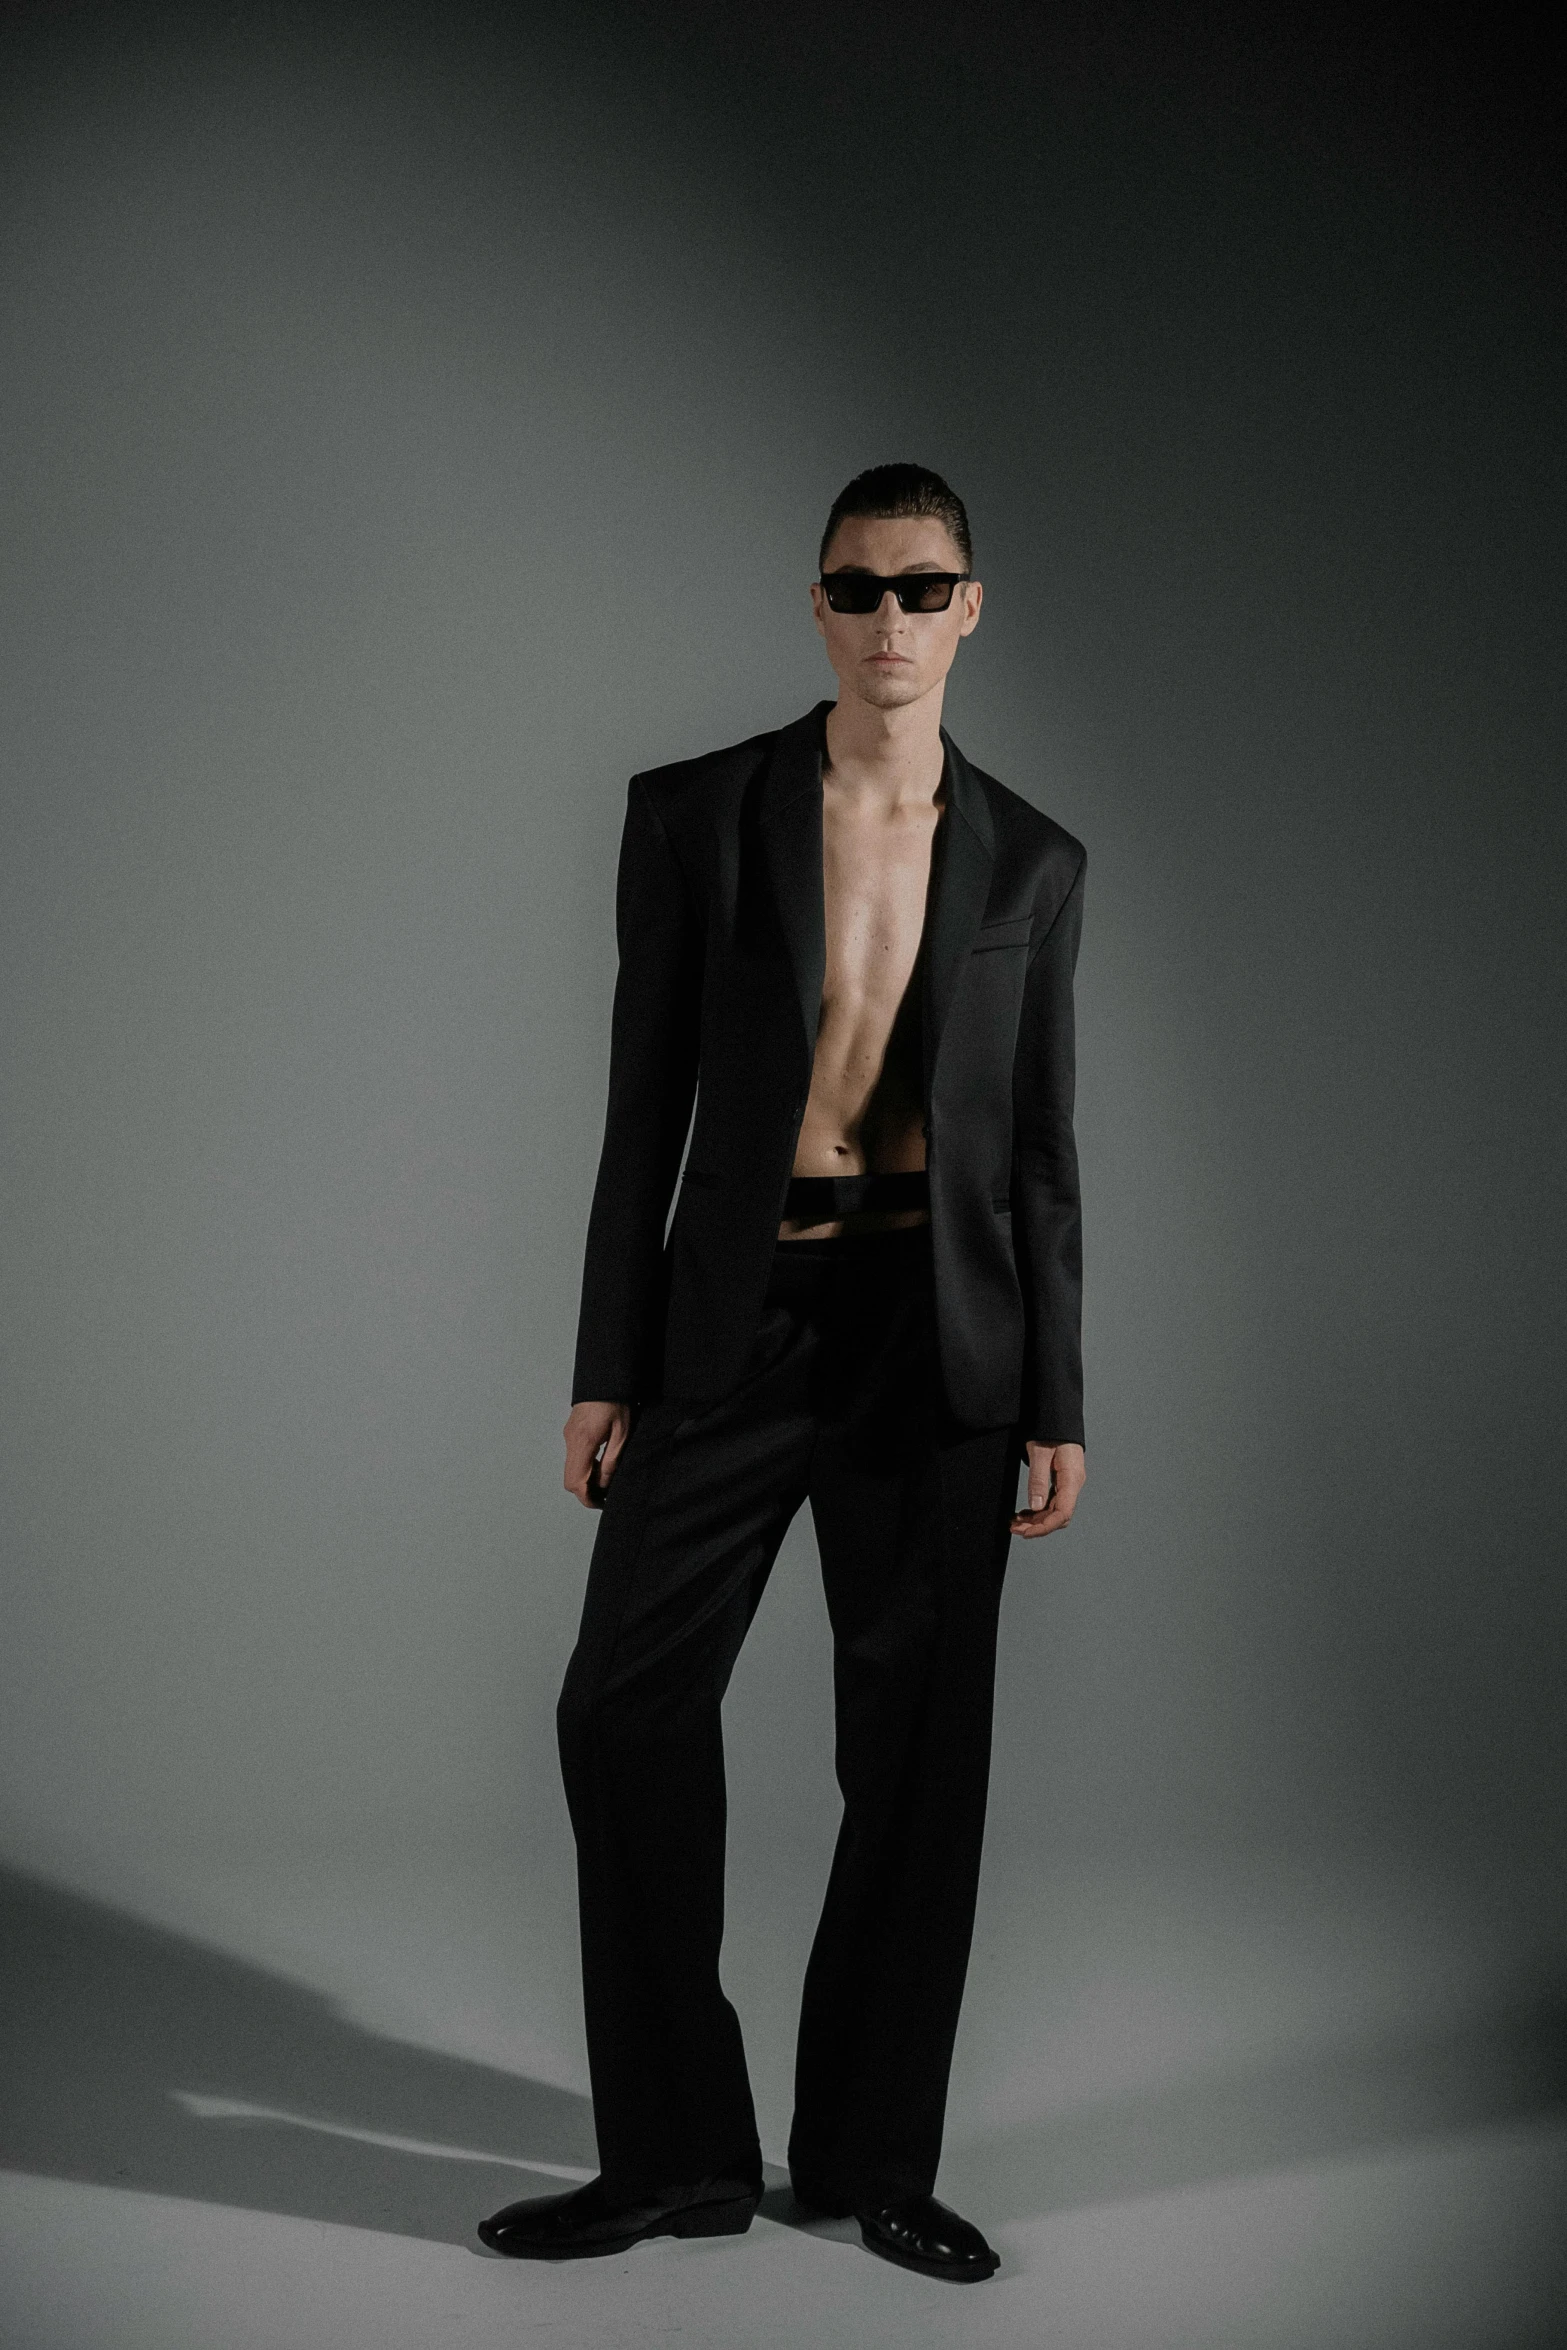 an shirtless man in a tuxedo poses for a studio po